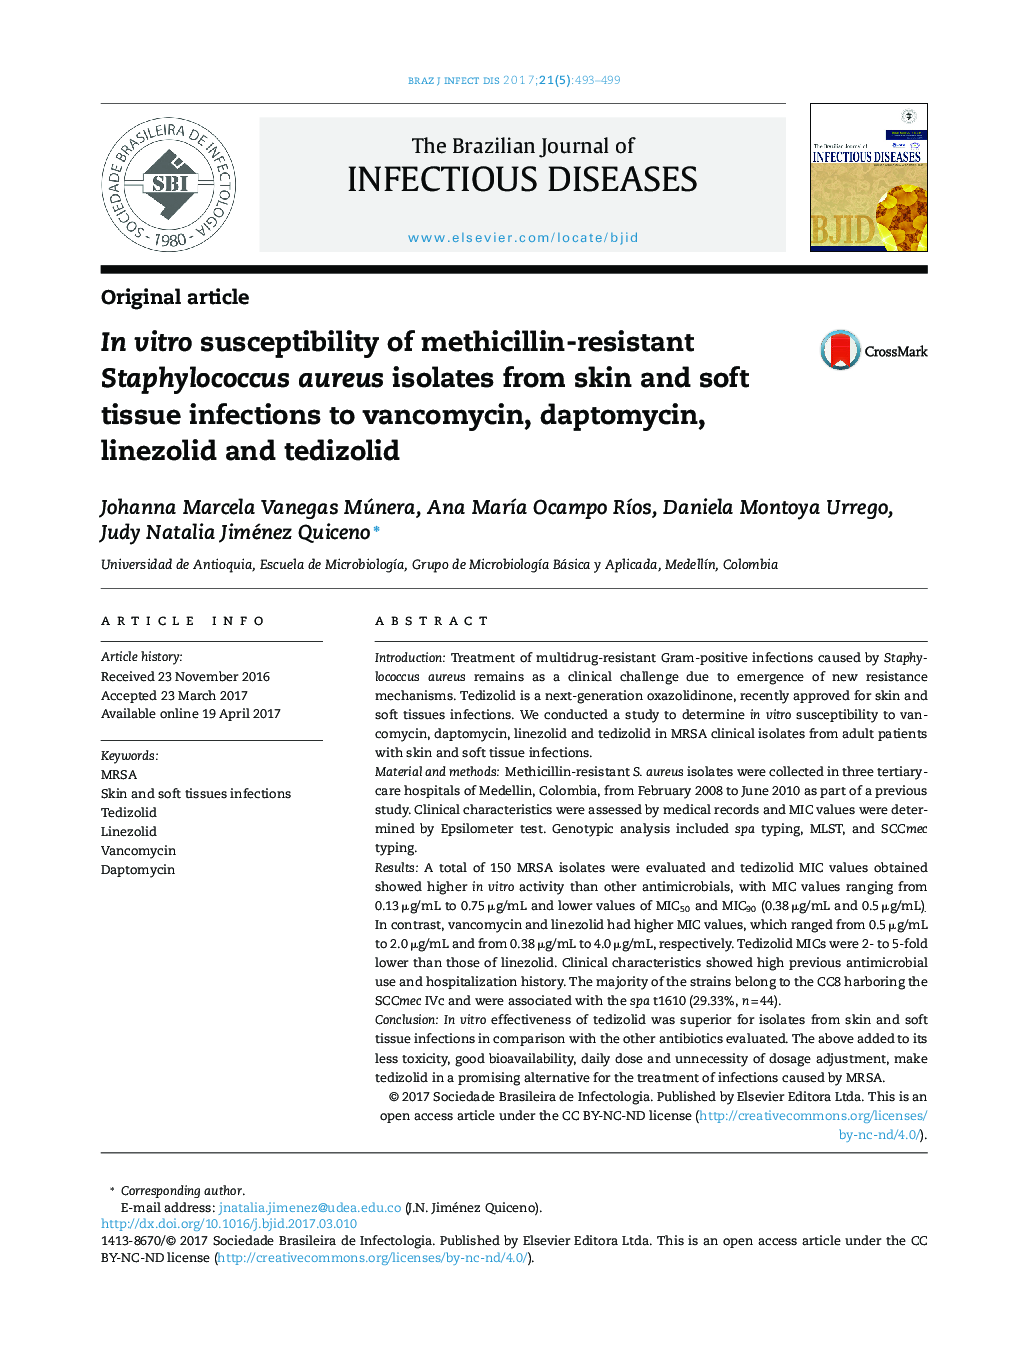 In vitro susceptibility of methicillin-resistant Staphylococcus aureus isolates from skin and soft tissue infections to vancomycin, daptomycin, linezolid and tedizolid